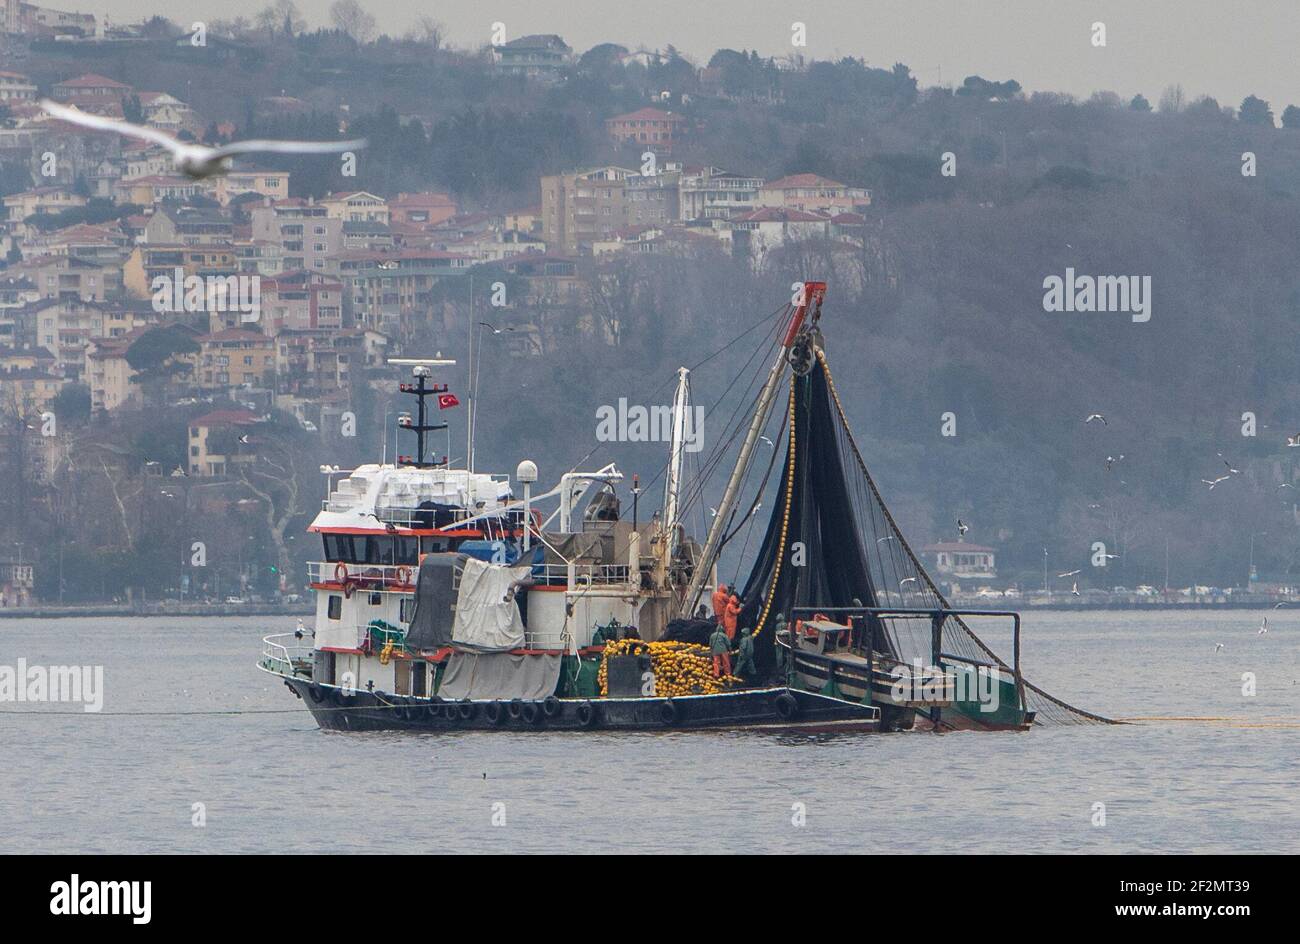 (210312) -- ISTANBUL, March 12, 2021 (Xinhua) -- A fishing boat is seen on the Black Sea in Istanbul, Turkey, on March 6, 2021. The Black Sea is packed with local bottom fishes, including haddock, mullet, and turbot. There are also migrating fishes from the Atlantic Sea, such as bonito, bluefish, anchovy, and horse-mackerel. However, climate change, overfishing, and other natural causes have had tremendous adverse impacts on the stocks of fisheries and aquaculture. Restrictions related to the COVID-19 pandemic, as well as the rising costs of labor, fuel, and equipment also preoccupy the fisher Stock Photo